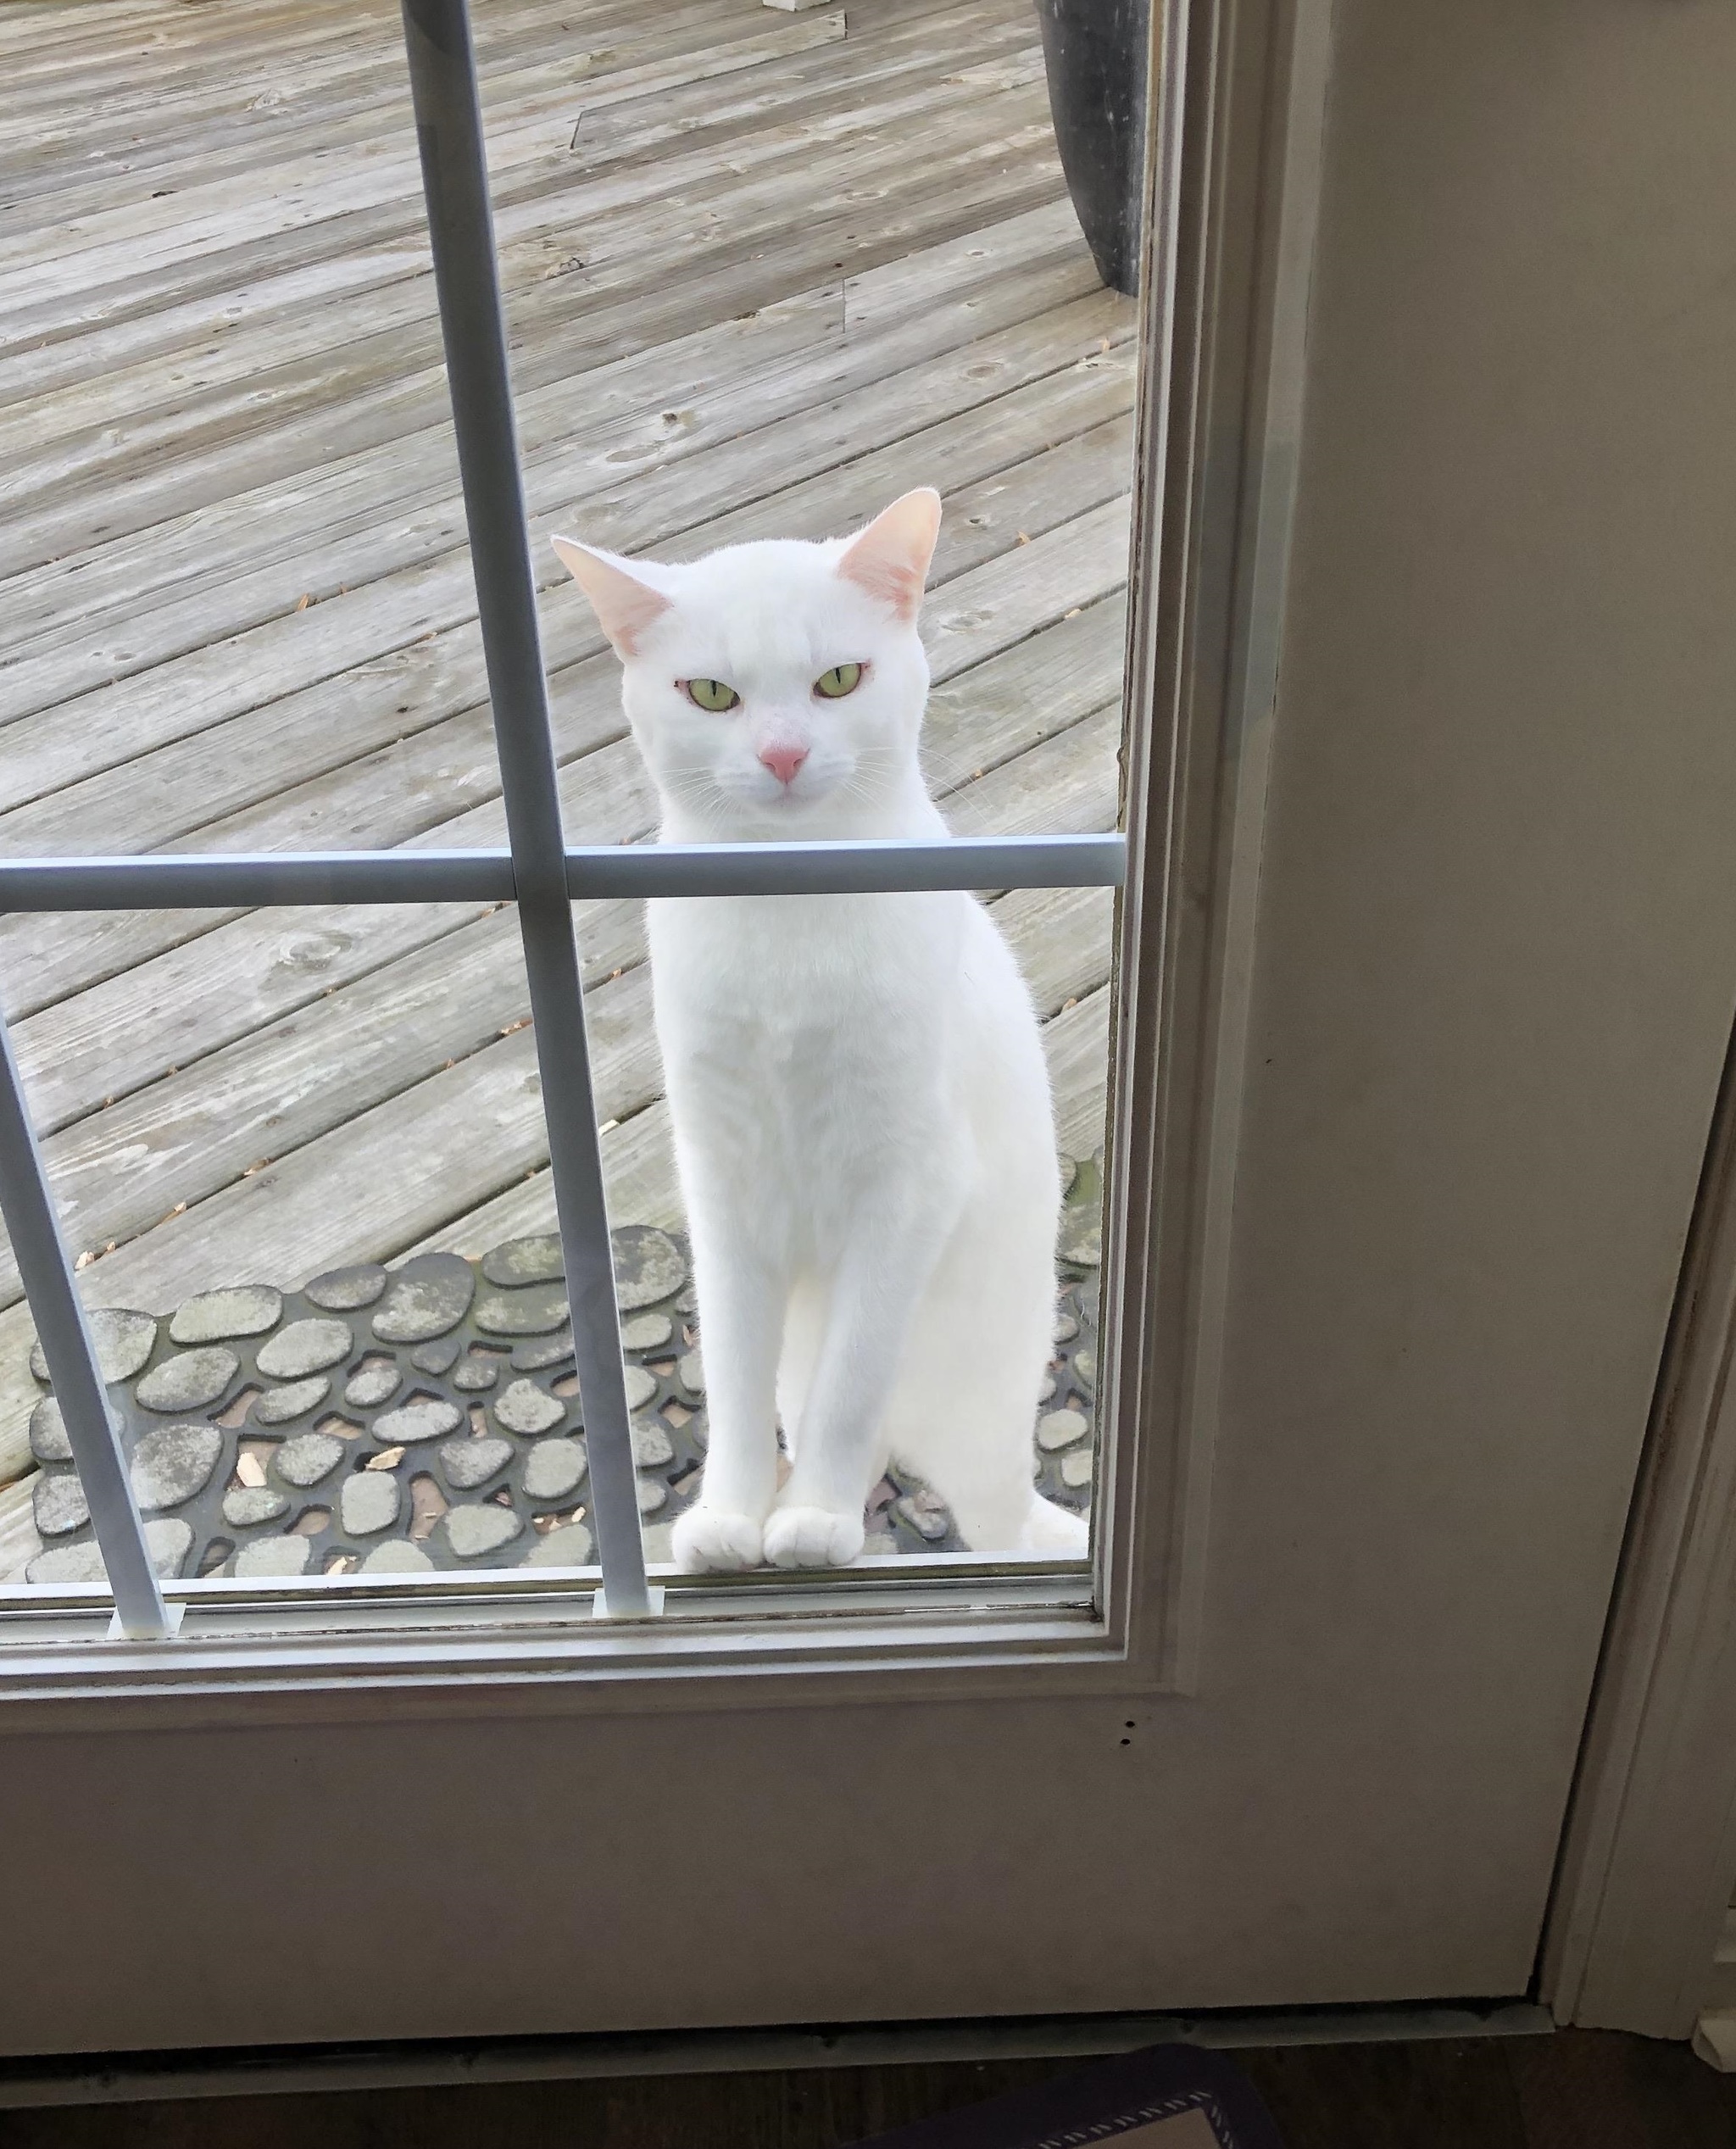 She never meows for us to let her in, she just...stares. - Door, cat, Let, The photo